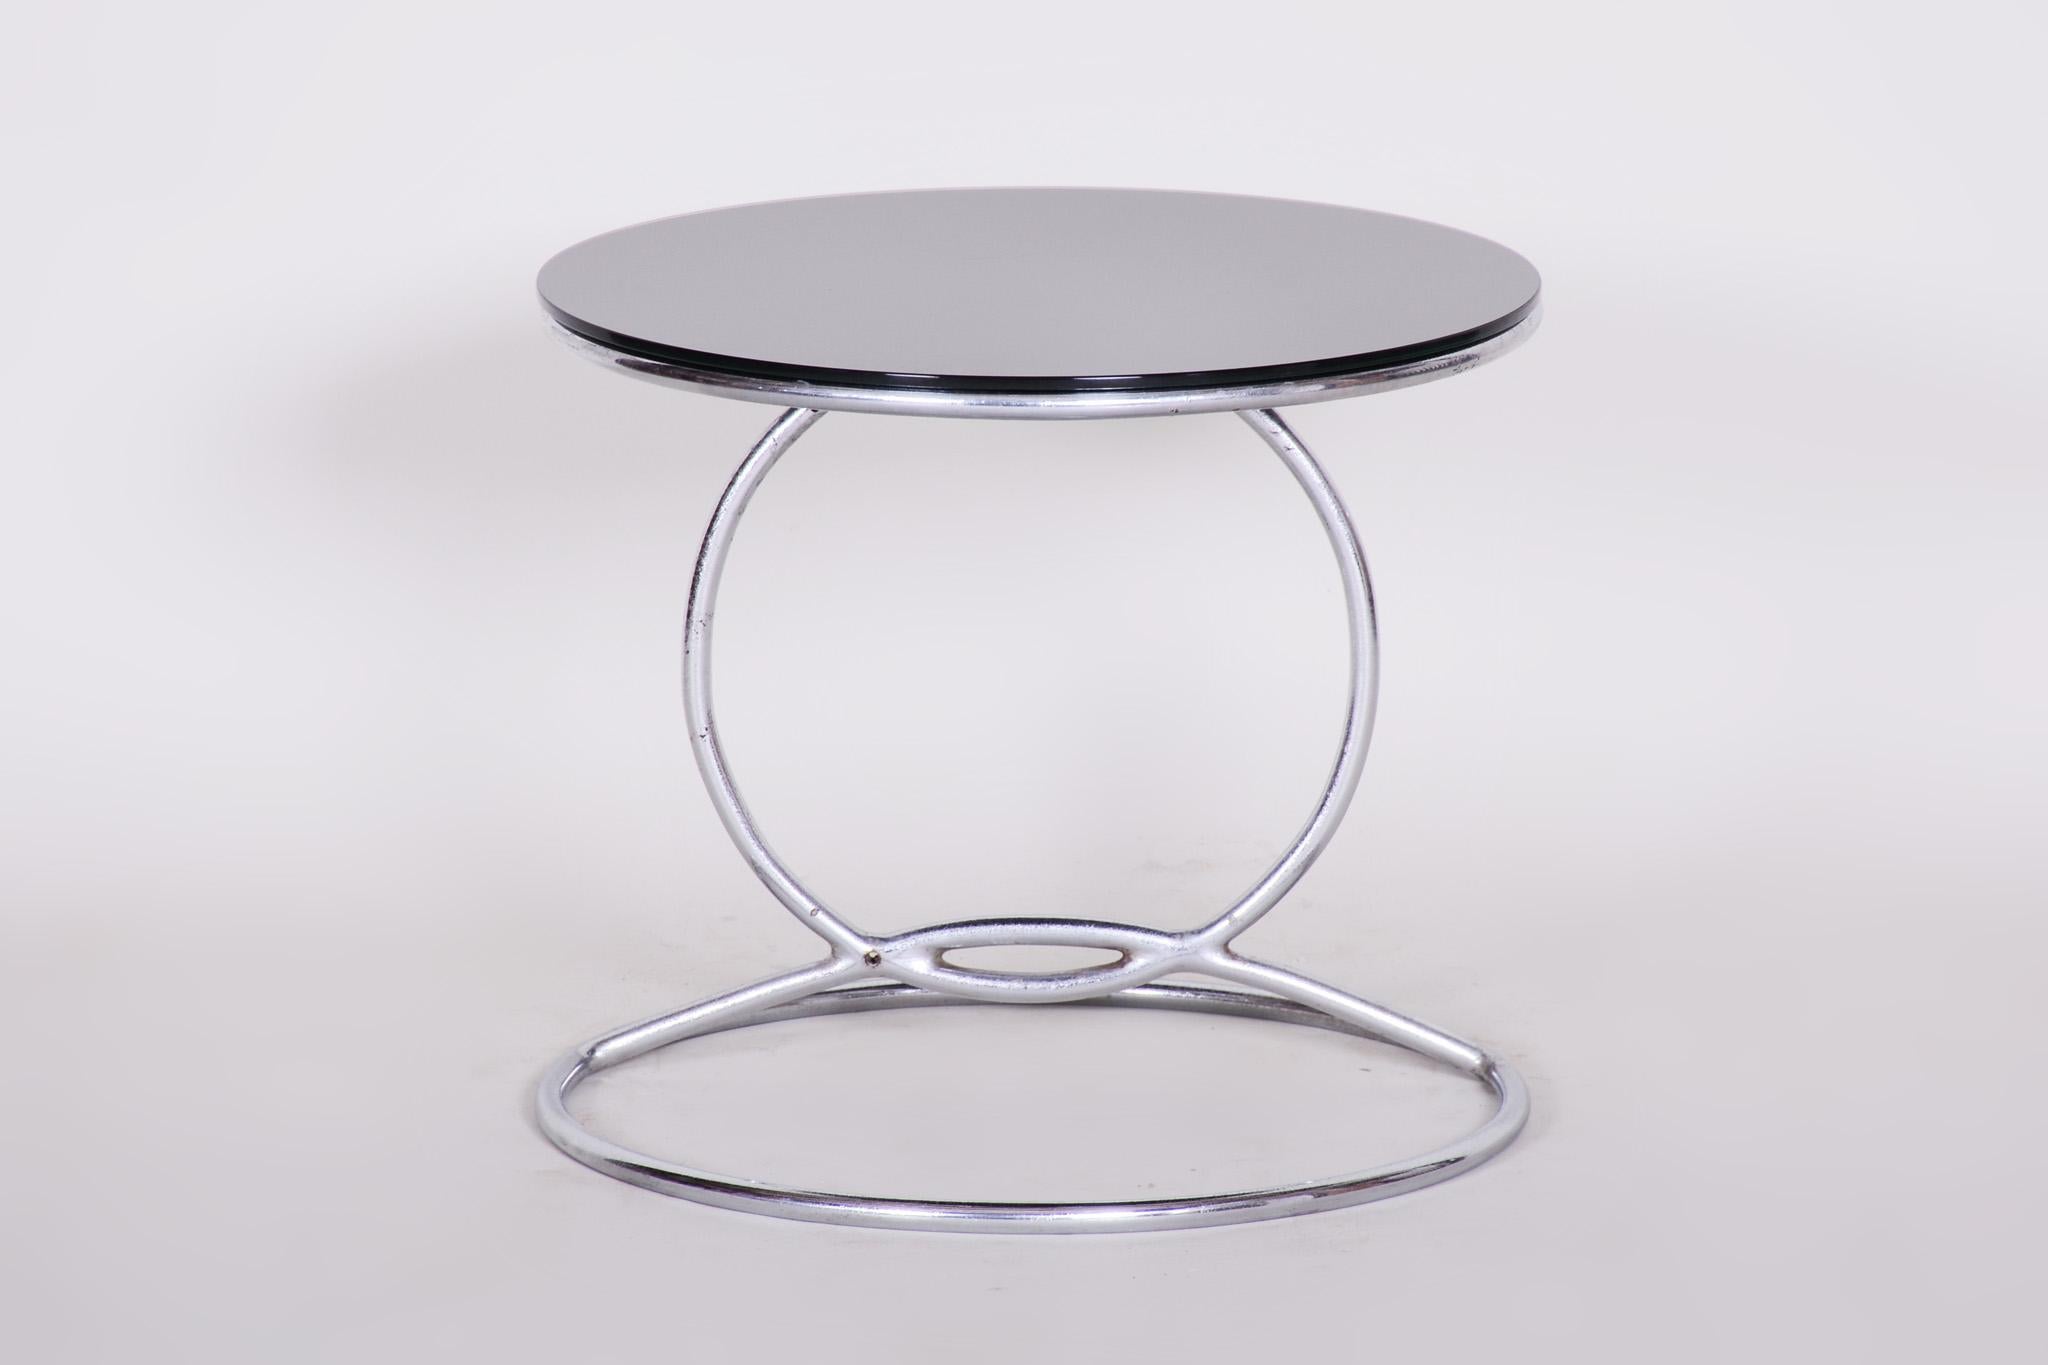 Bauhaus round table
Source: Germany
Original really good condition.
Material: Chrome and Black glass
Period: 1950-1959





 